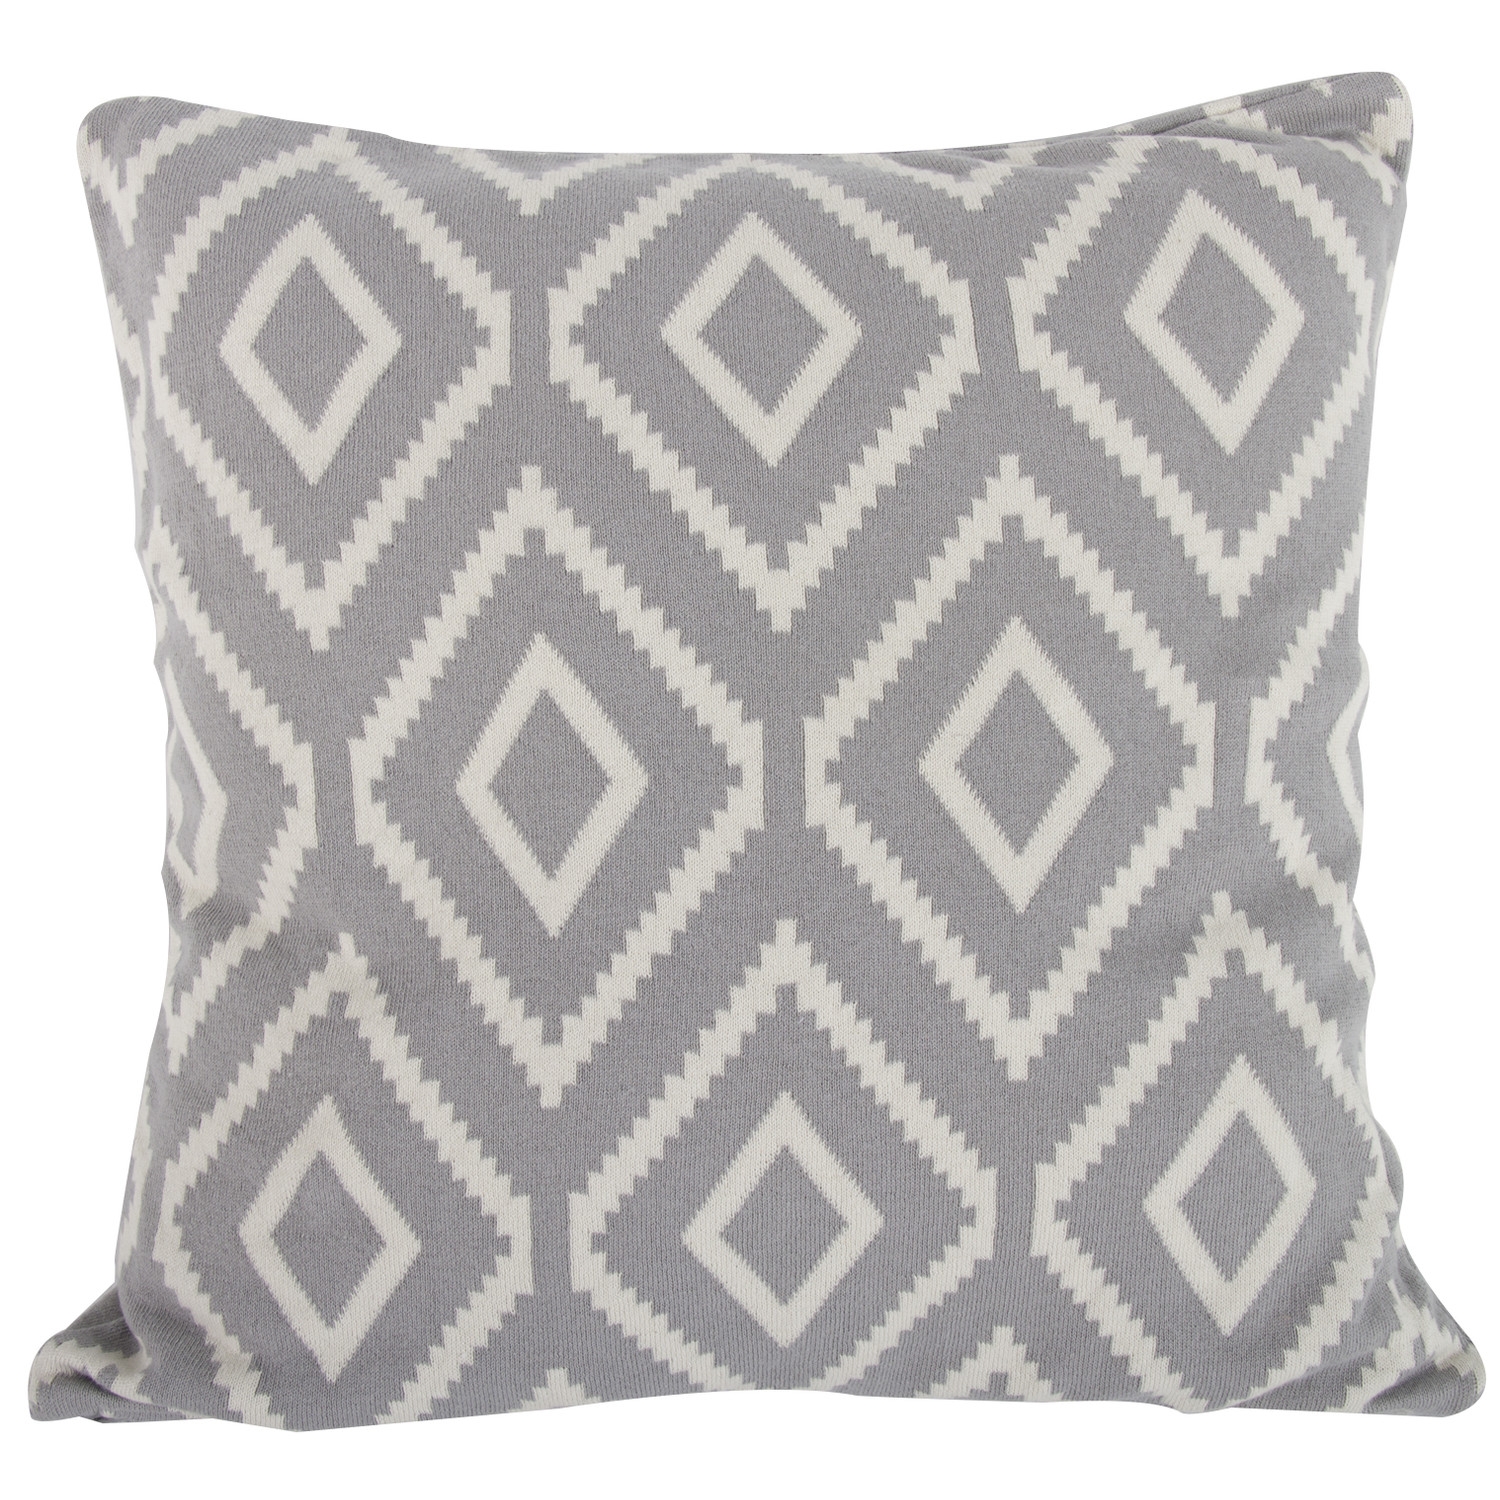 Ekra Cashmere Blend Throw Pillow, Grey - 20'' x 20'' - Insert included - Image 0